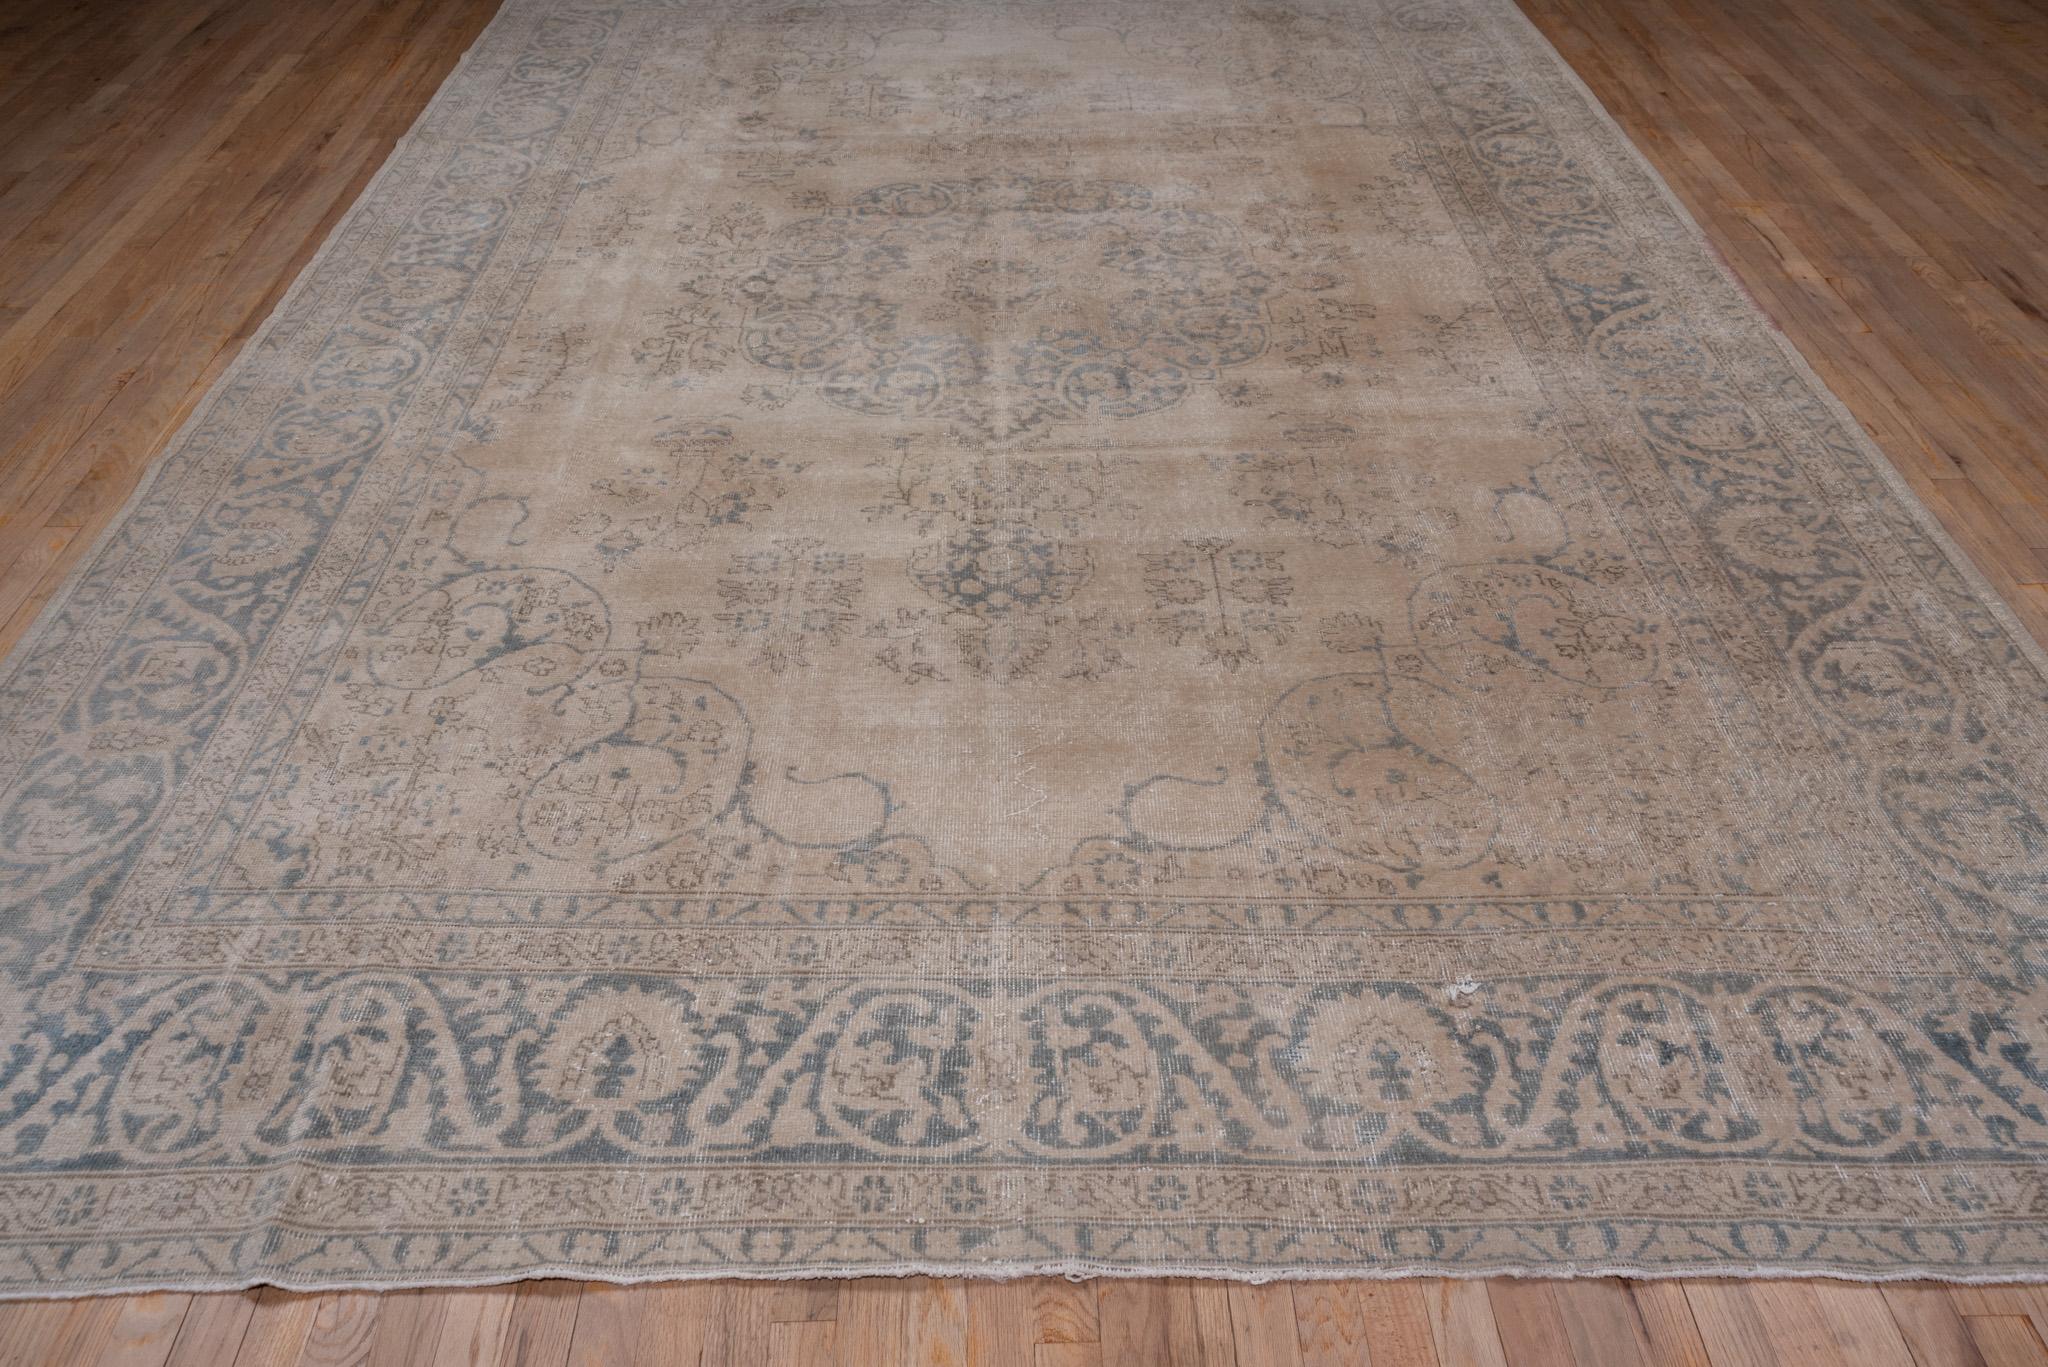 An Oushak Rug circa 1940. Hand Knotted, made of 100% wool yarn. 